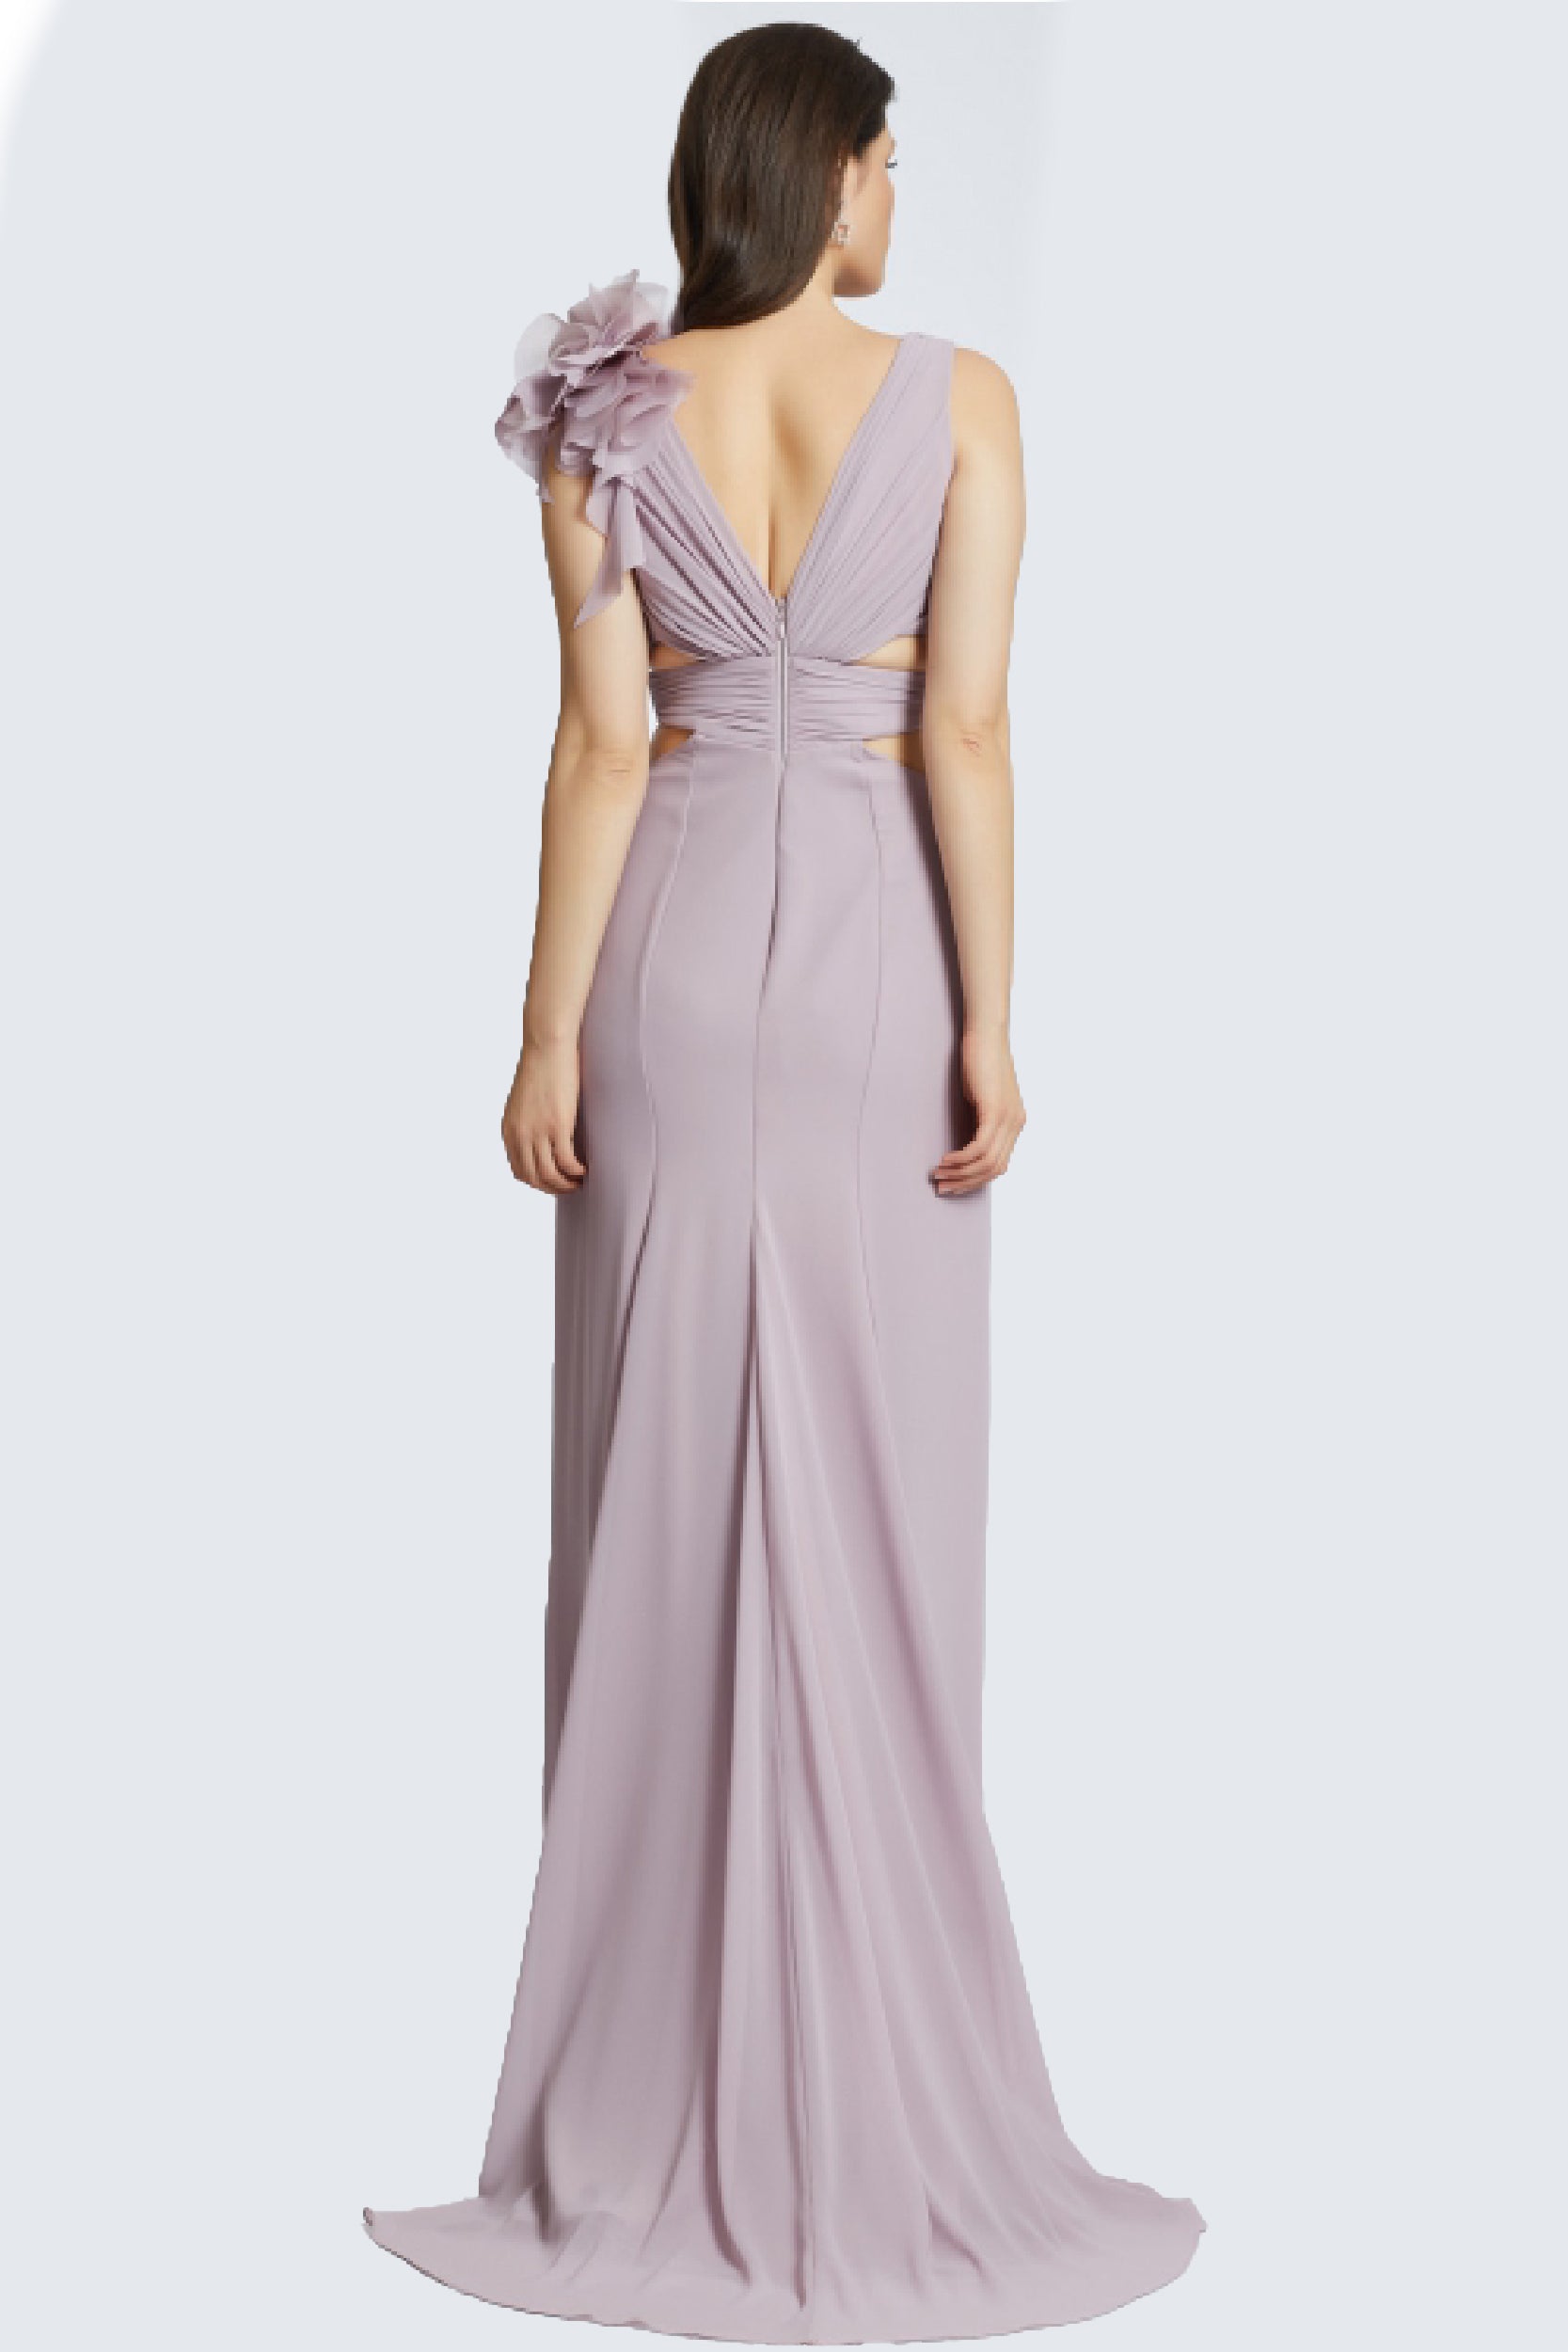 Judy - Mystic Evenings | Evening and Prom Dresses